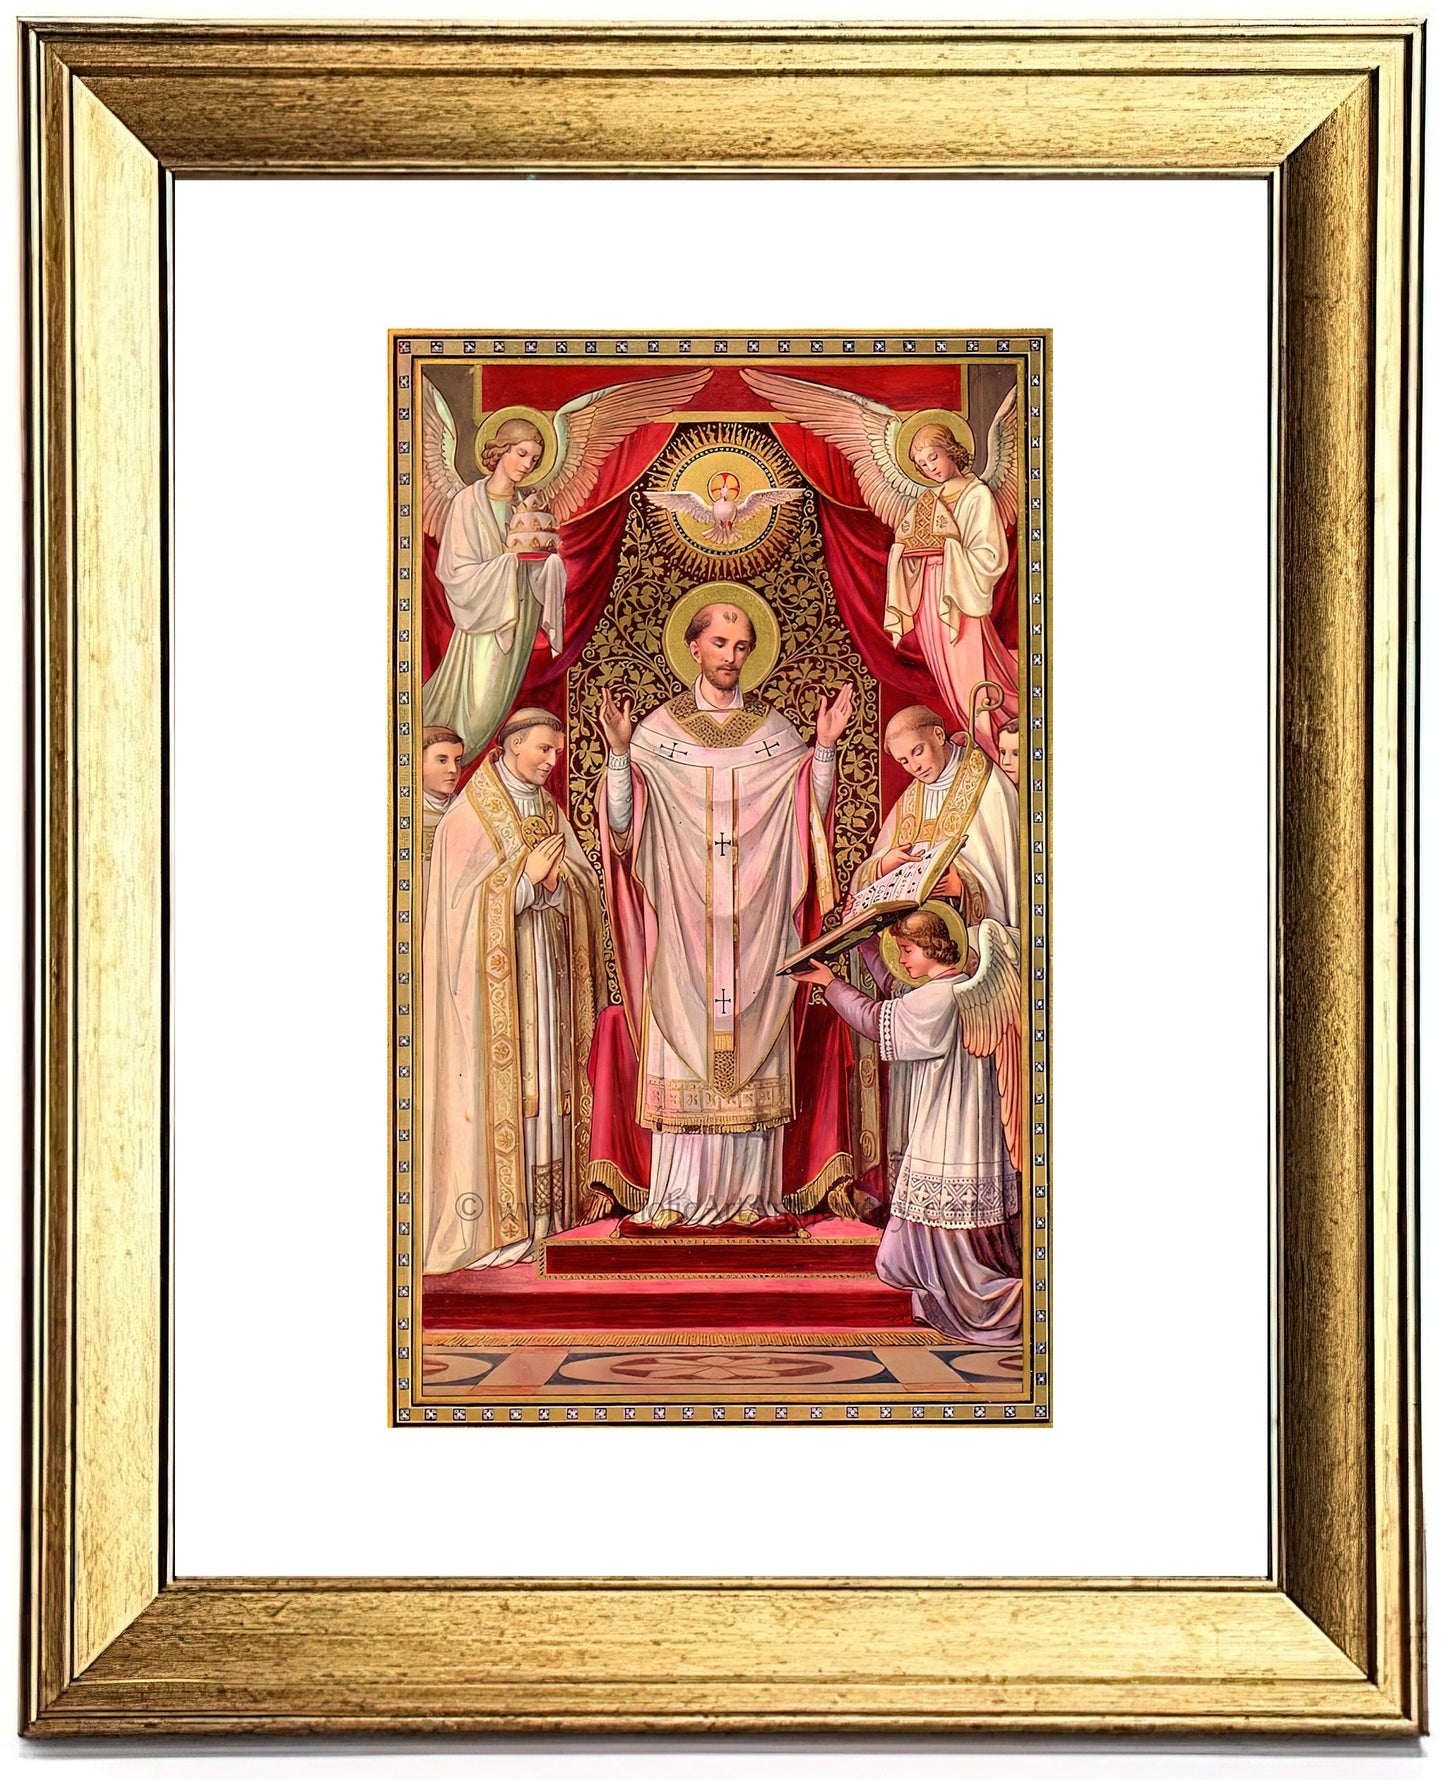 St. Gregory the Great – 3 sizes – Based on an Antique Holy Card – Catholic Art Print – Archival Quality